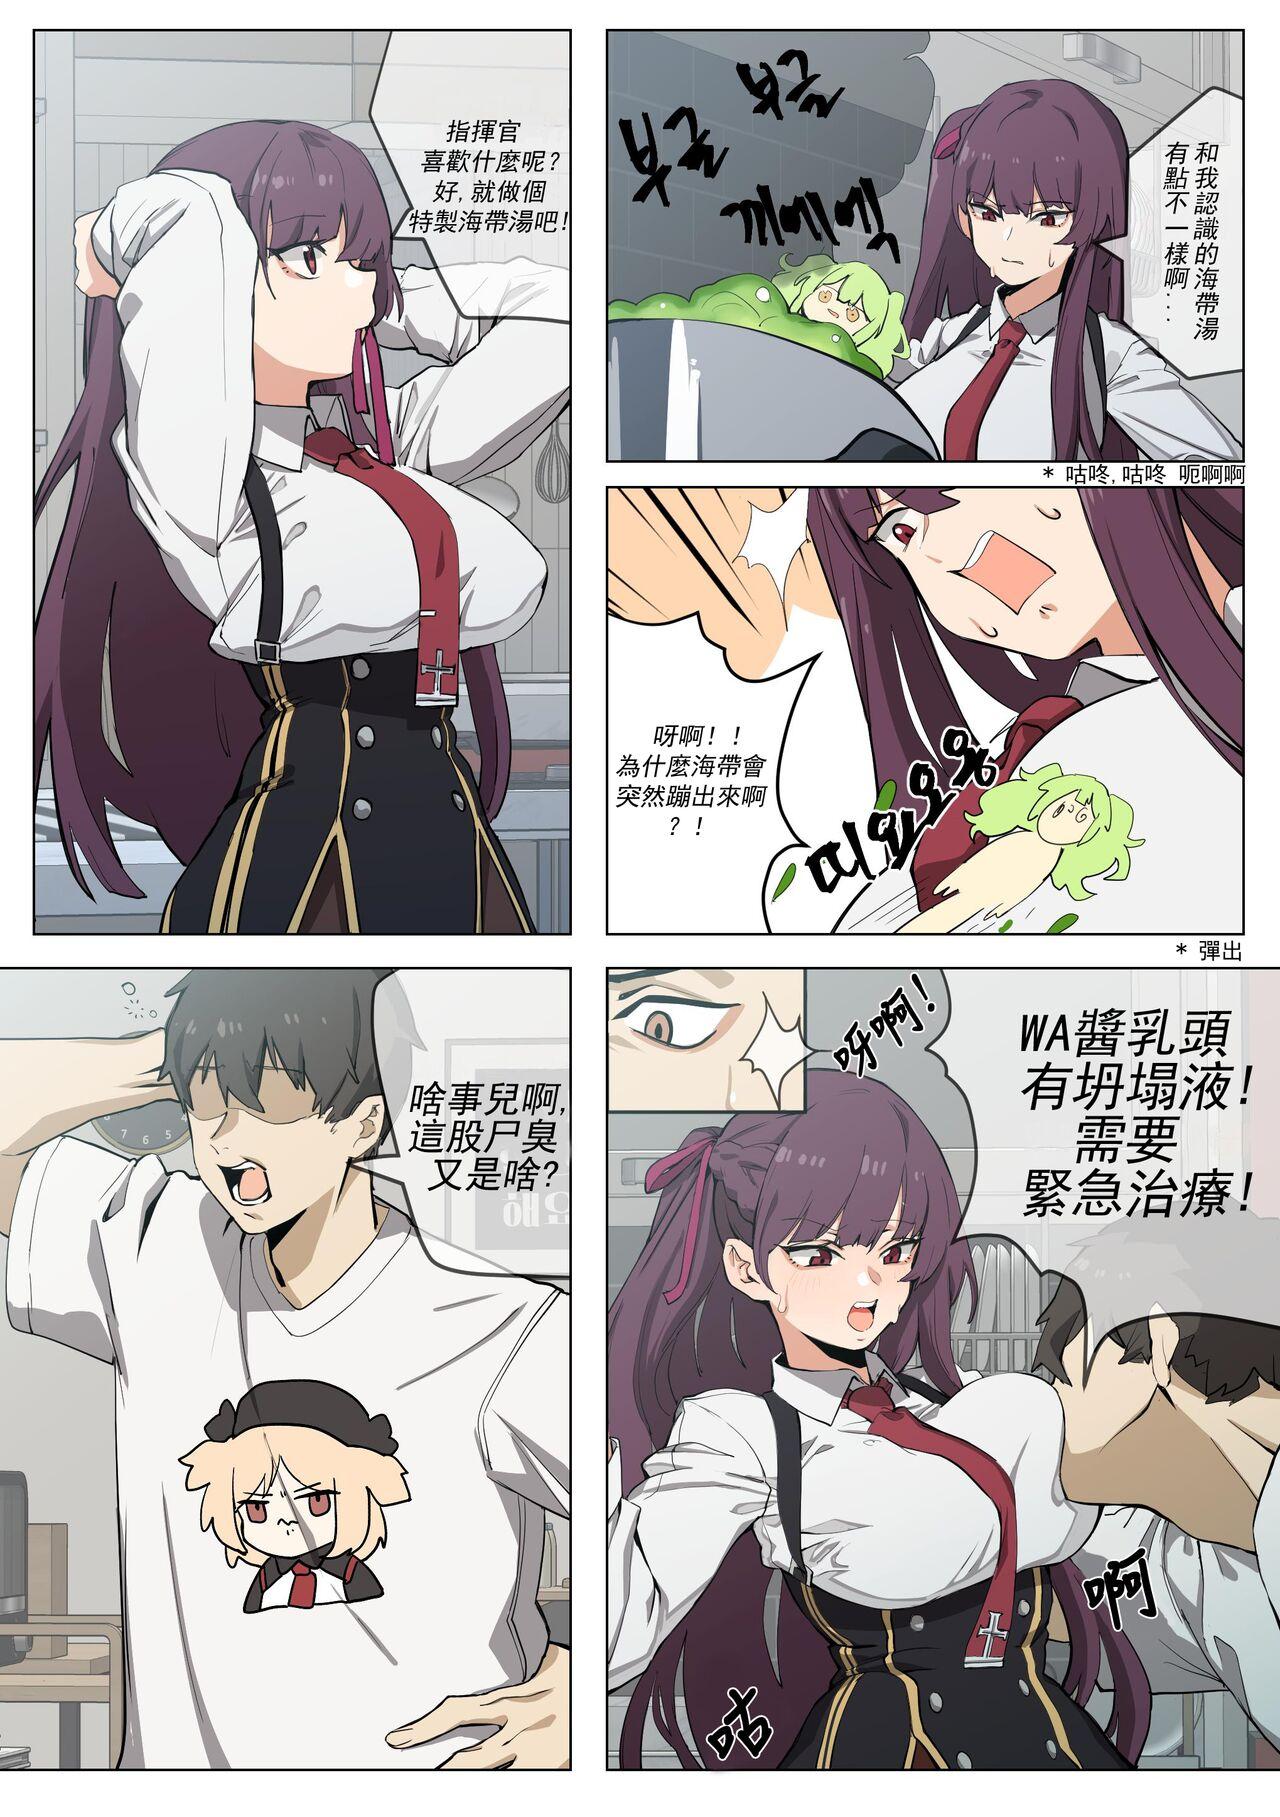 Clothed 【banssee】wa2000 （AKwoL烤肉组） Pigtails - Page 3